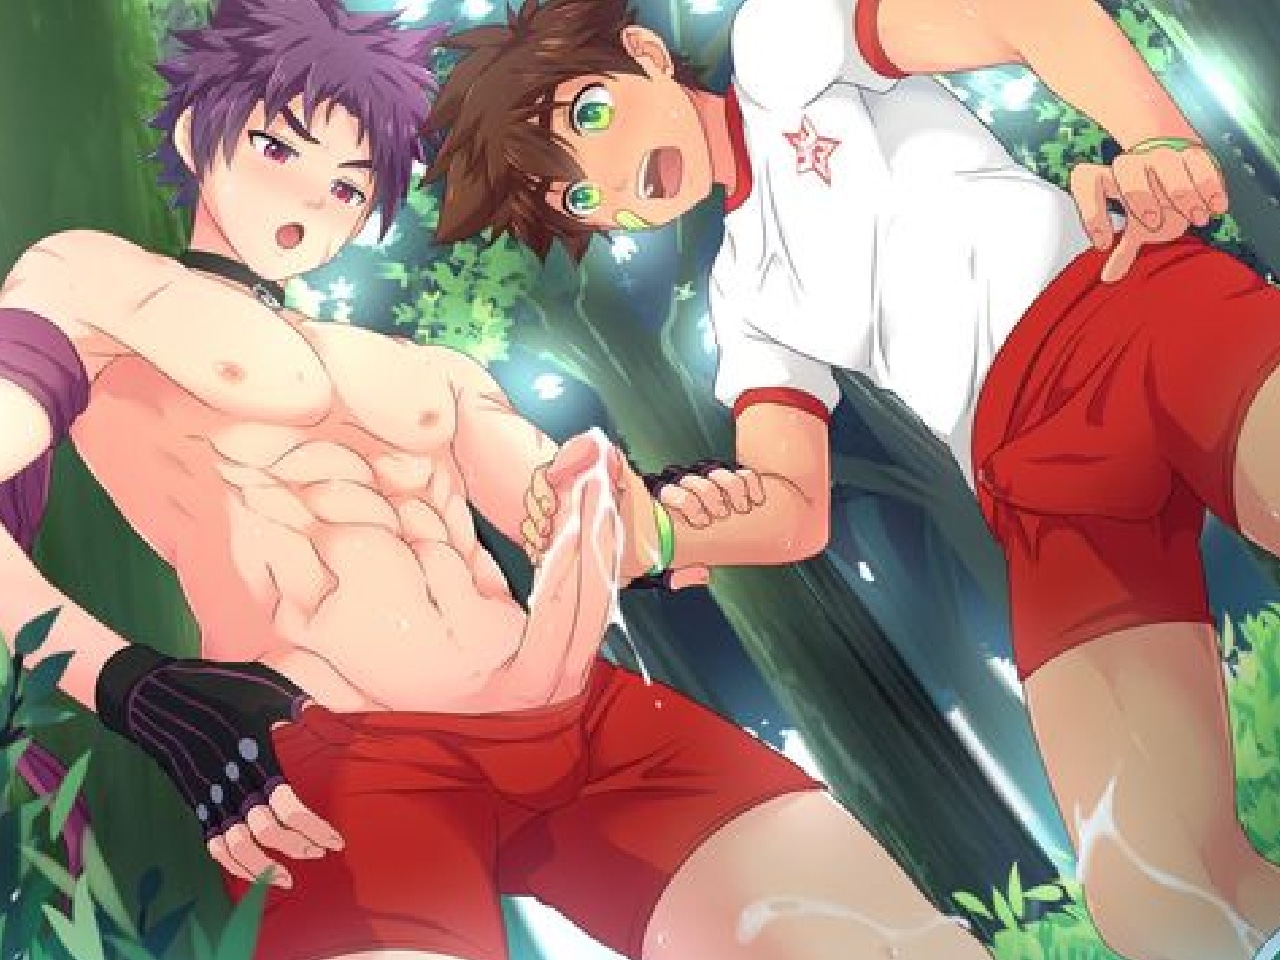 Anime Yaoi Sex Games - Gay Otome Games â€“ Free Gay Games Online